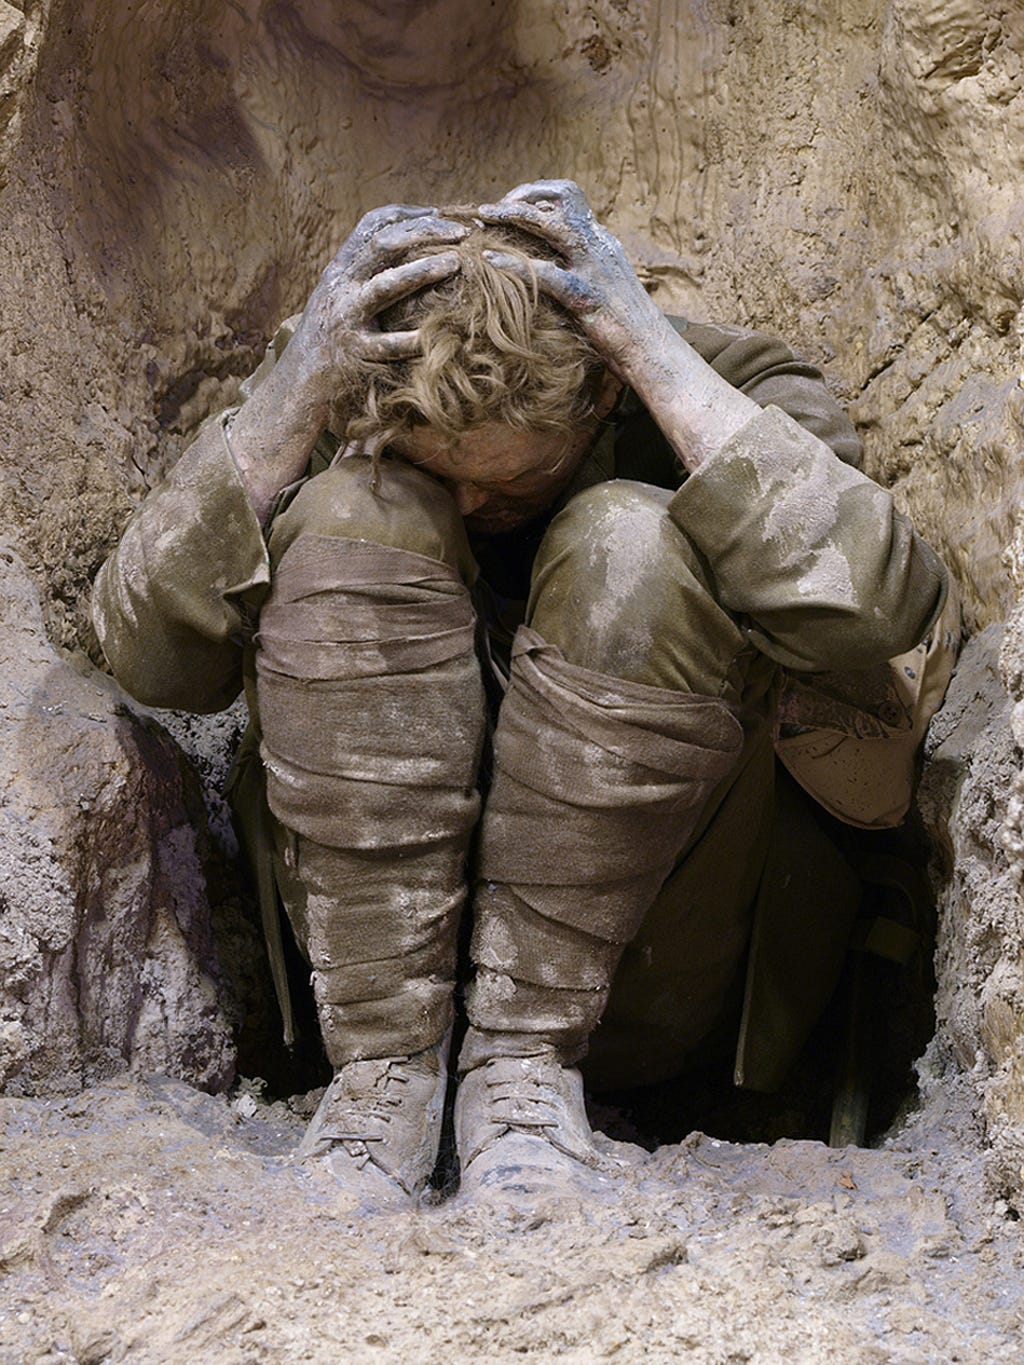 Image of a soldier from World War 1, curled up in shock inside  a trench.